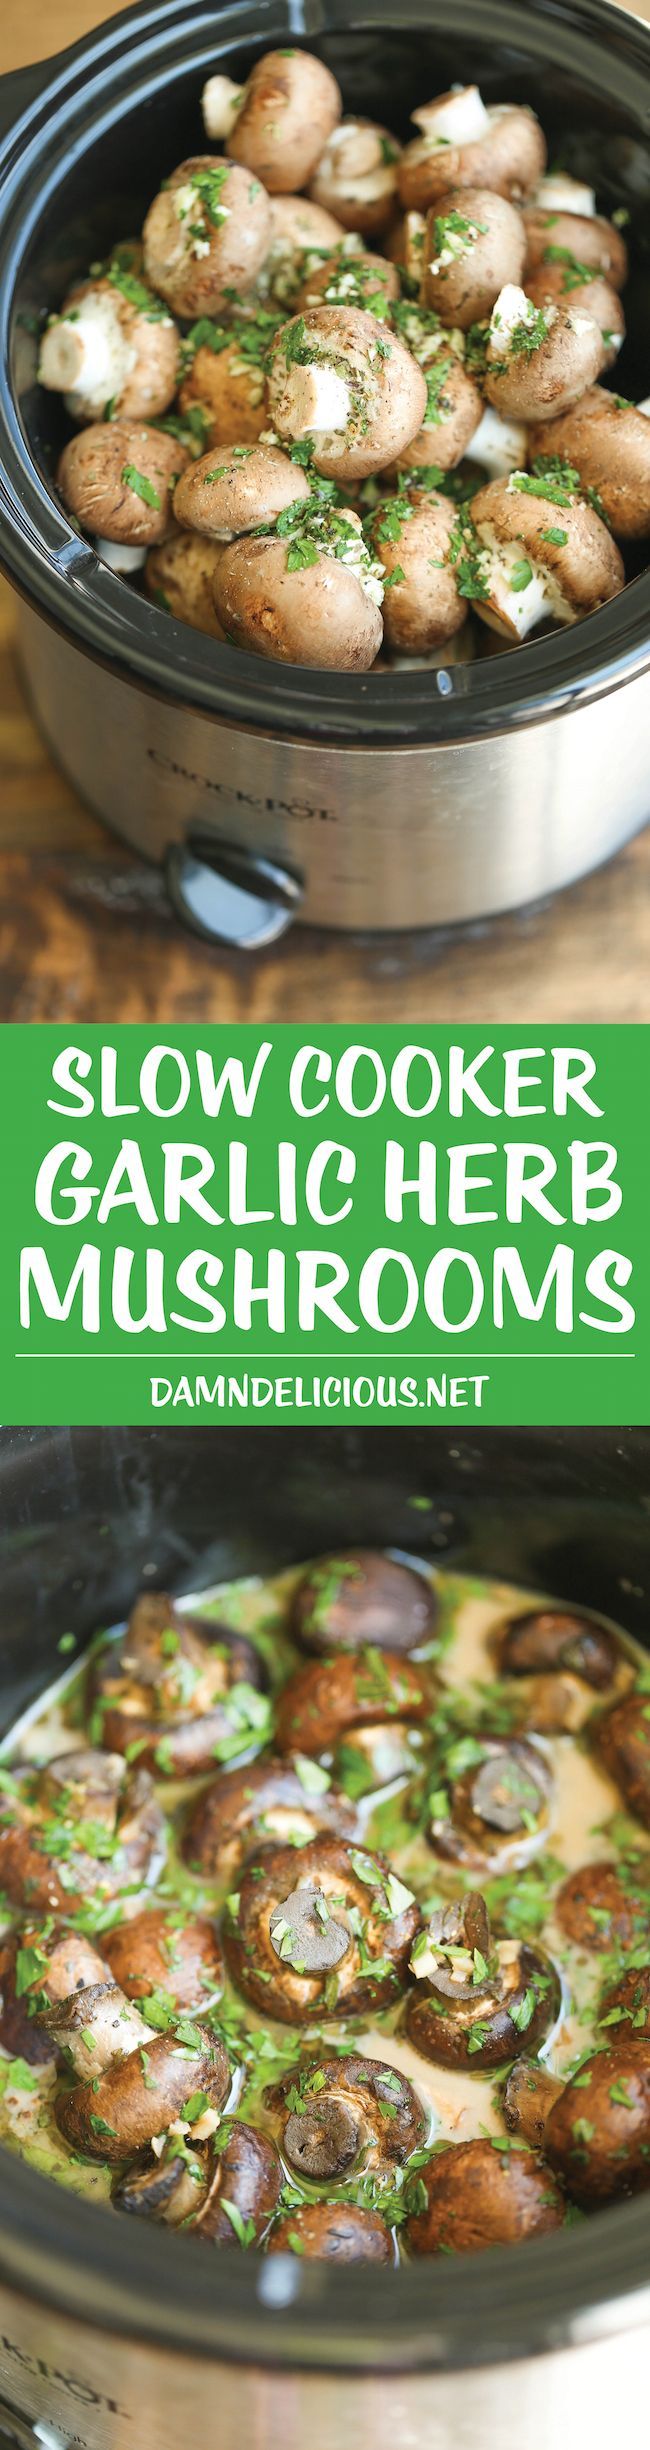 Slow Cooker Garlic Herb Mushrooms – The best and EASIEST way to make mushrooms – in a crockpot with garlic, herbs and of course,